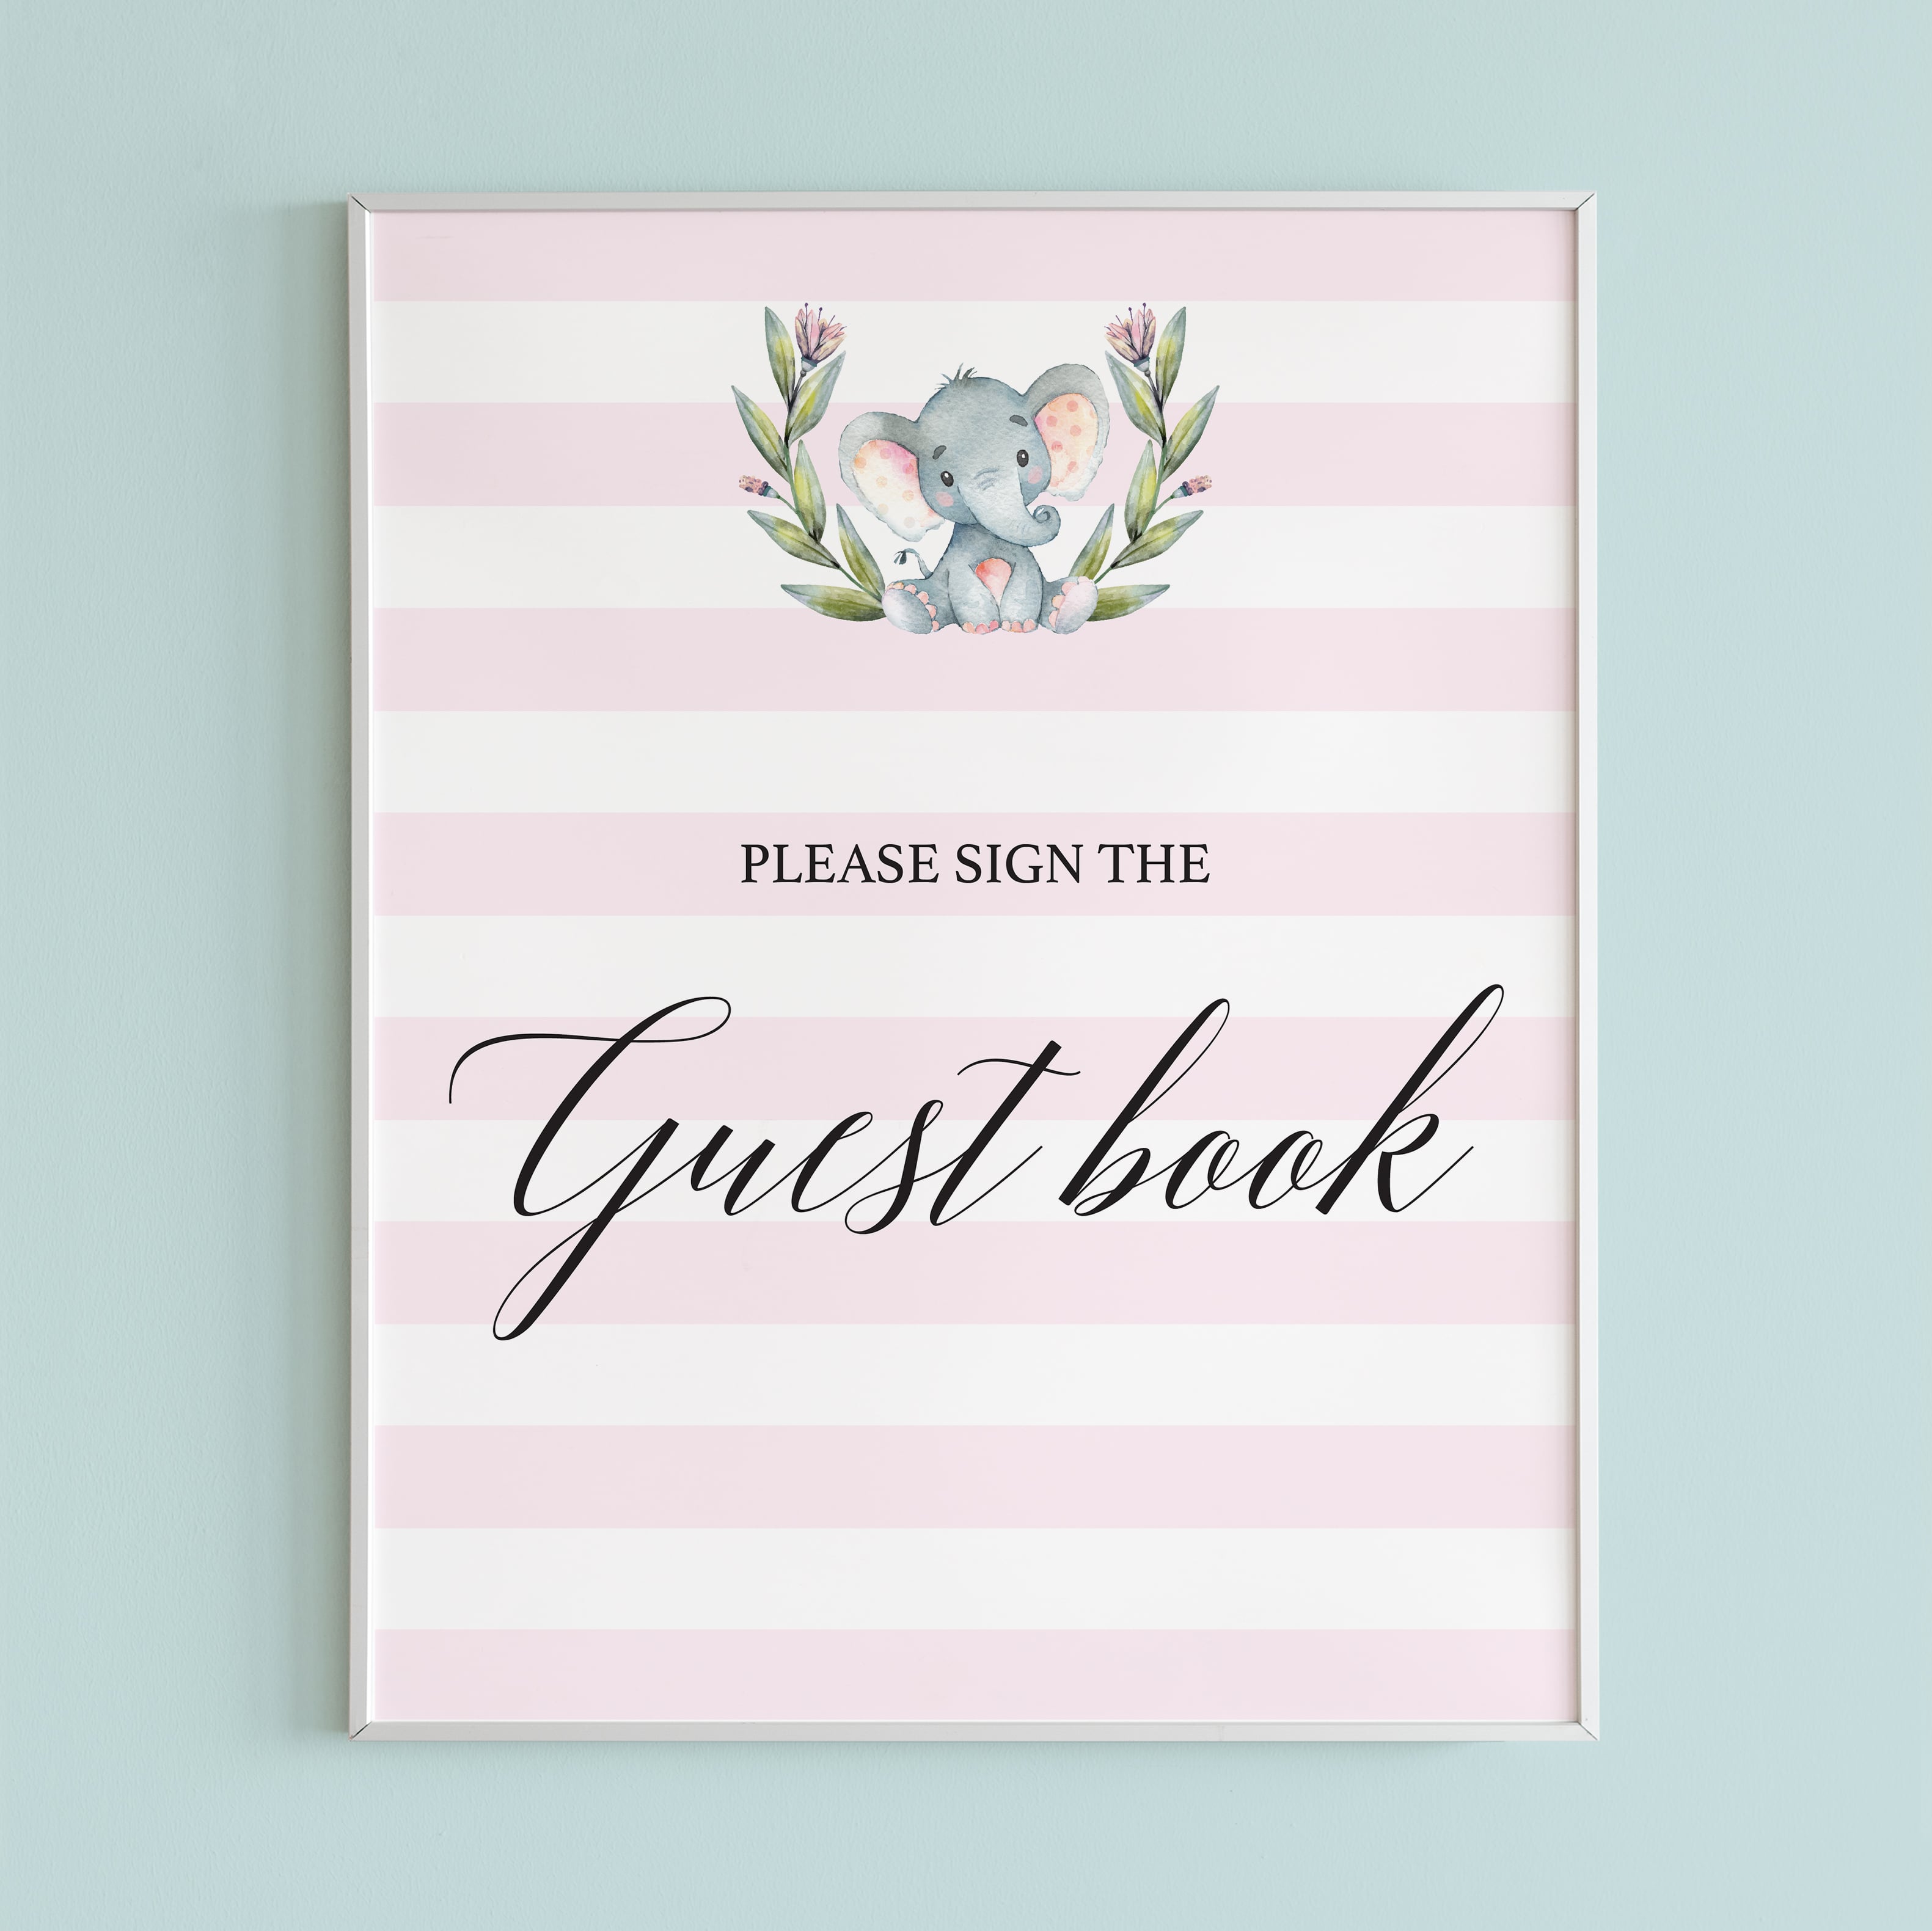 Elephant theme baby shower guest book table sign download by LittleSizzle